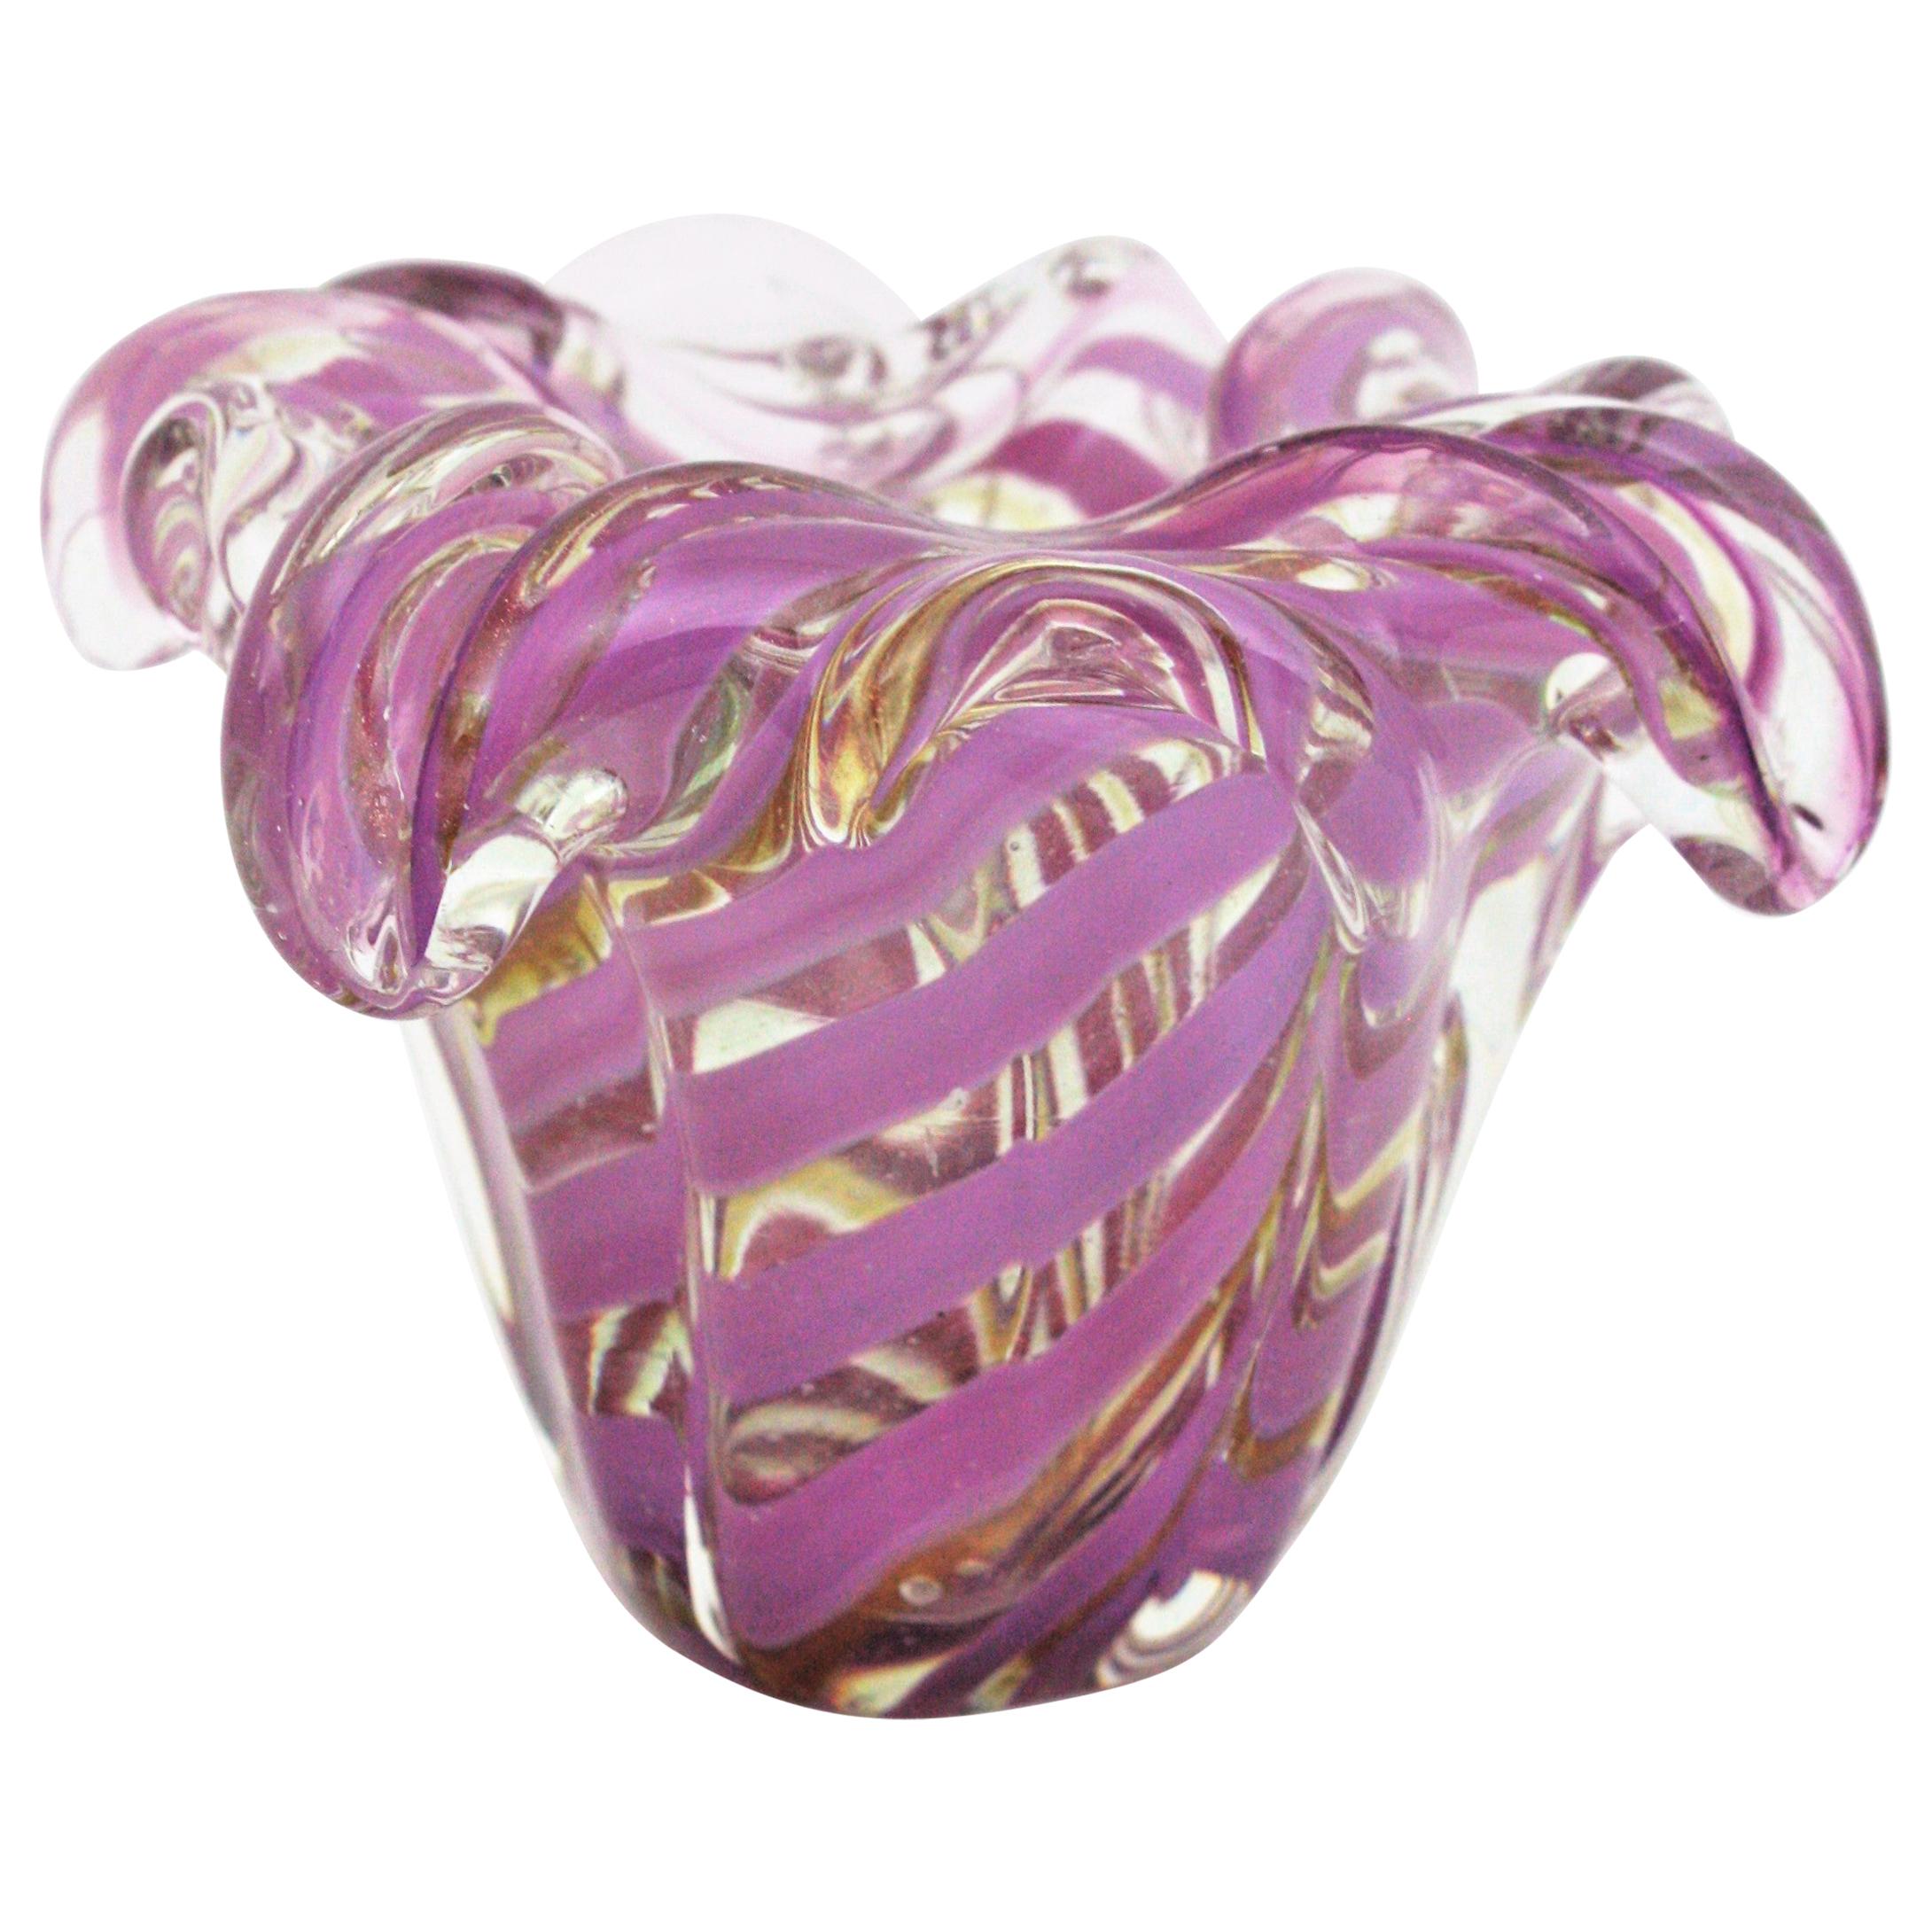 Exquiste hand blown Murano glass Sommerso swirl ribbon bowl with gold dust. Attributed to Fratelli Toso, Italy, 1950s.
This art glass bowl has a cane working twisting ribbons decoration in lilac/purple submerged into clear glass and accented by